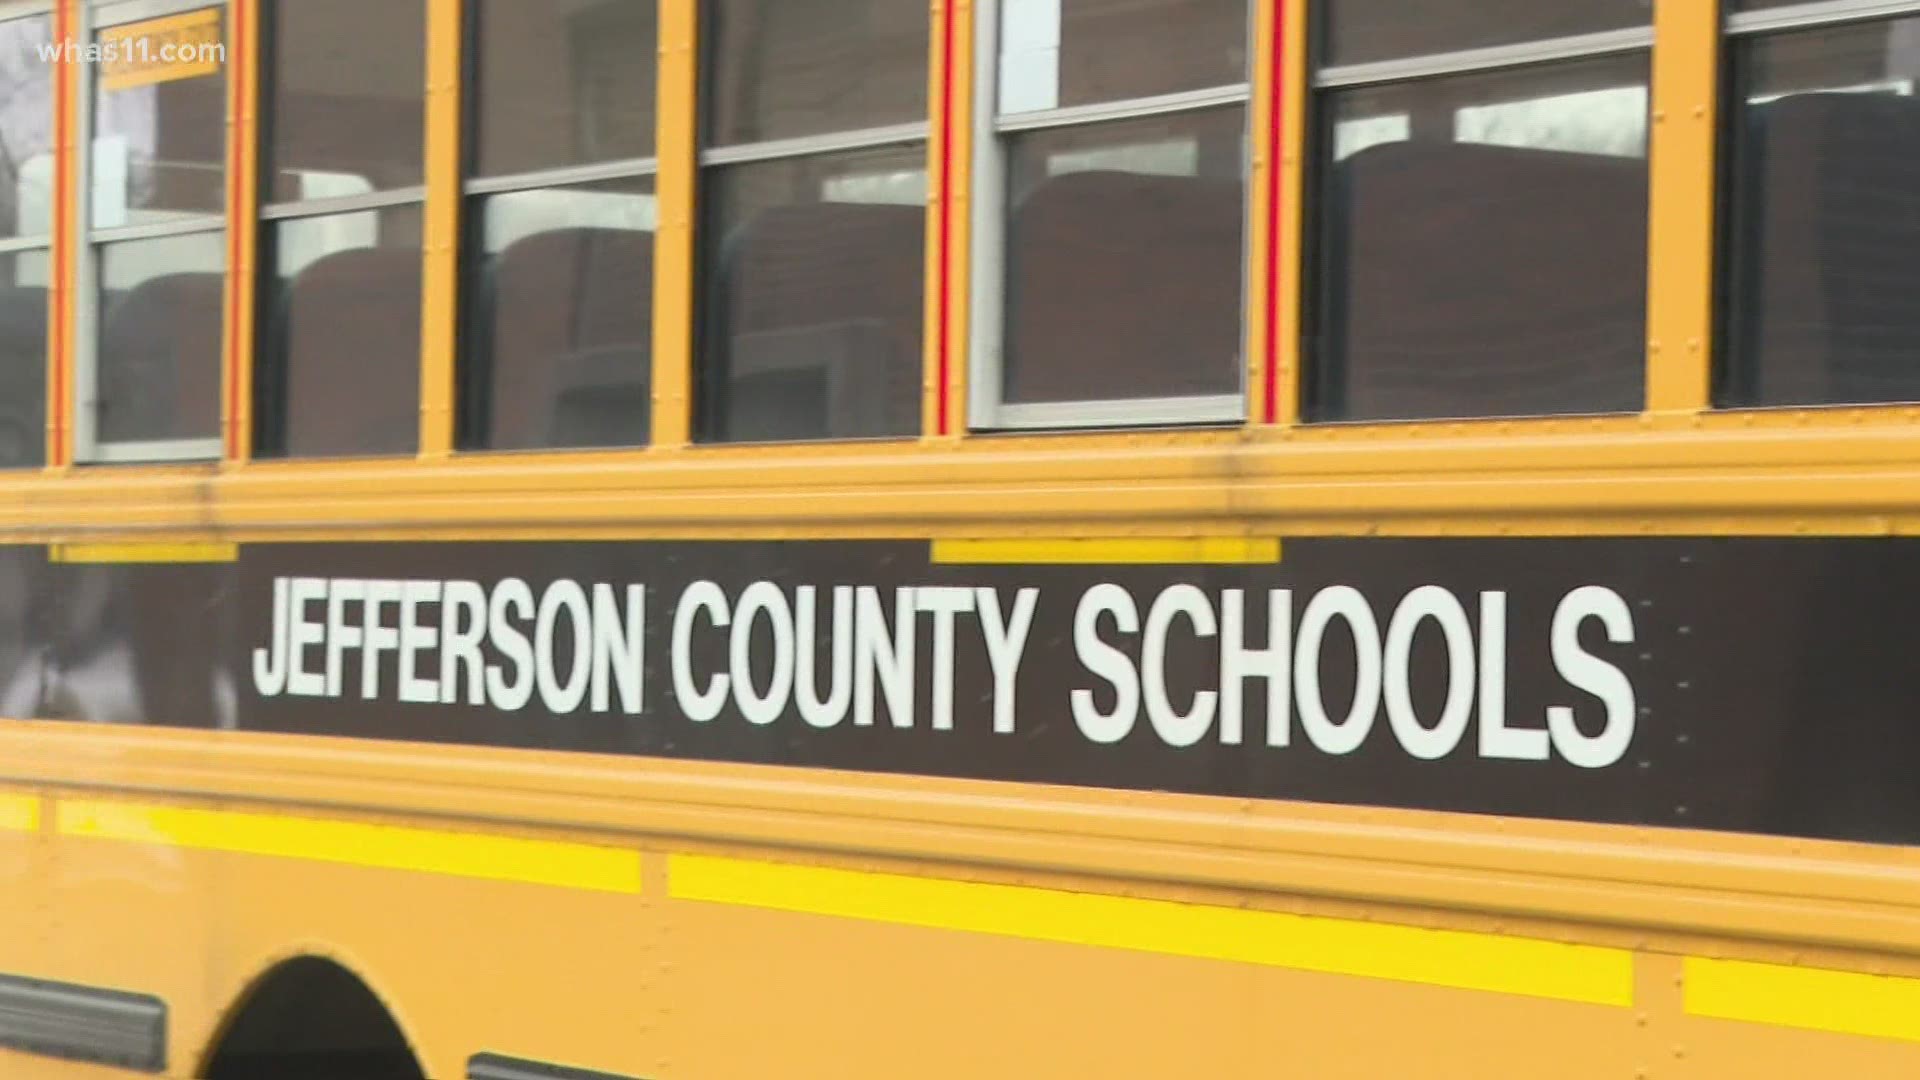 Viewers chime in on the approved plan for JCPS to reopen schools.